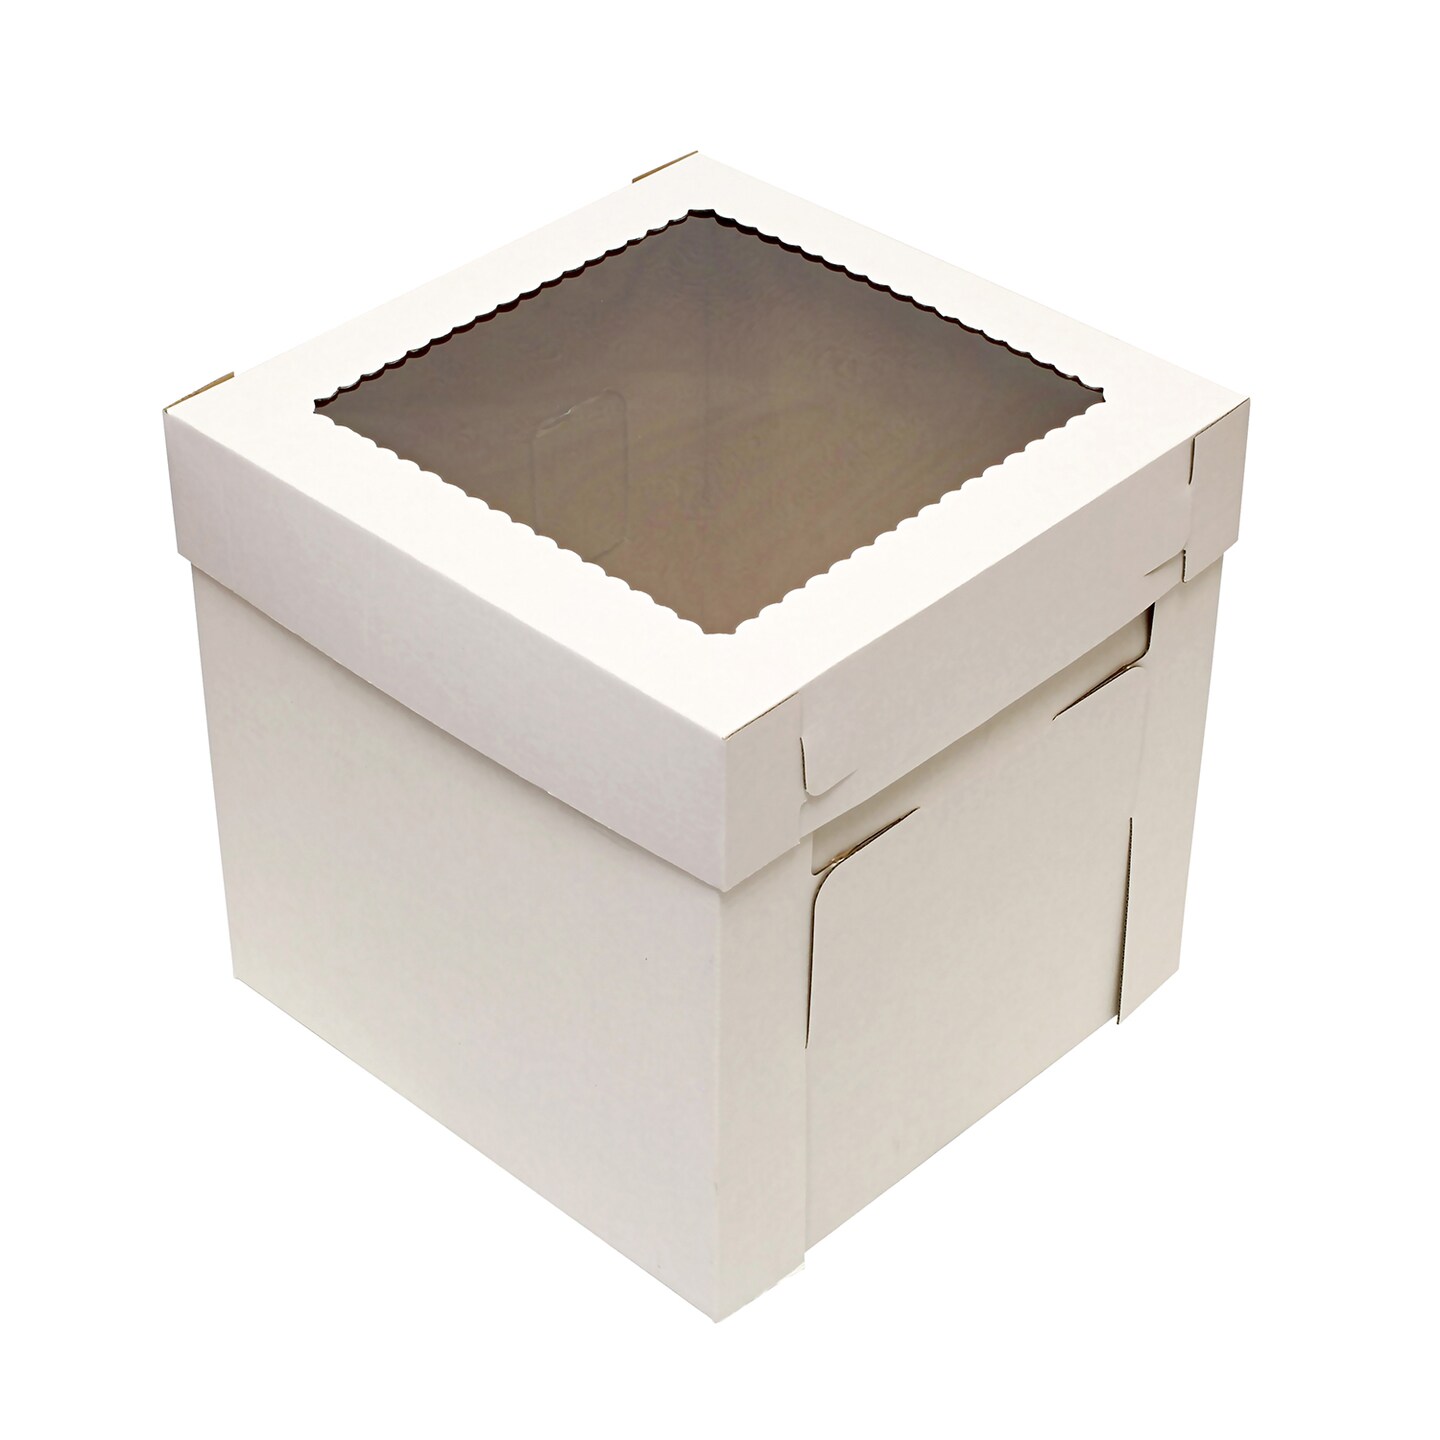 Spec101 | Cake Boxes with Window 25-Pack White Bakery Boxes Cake Containers